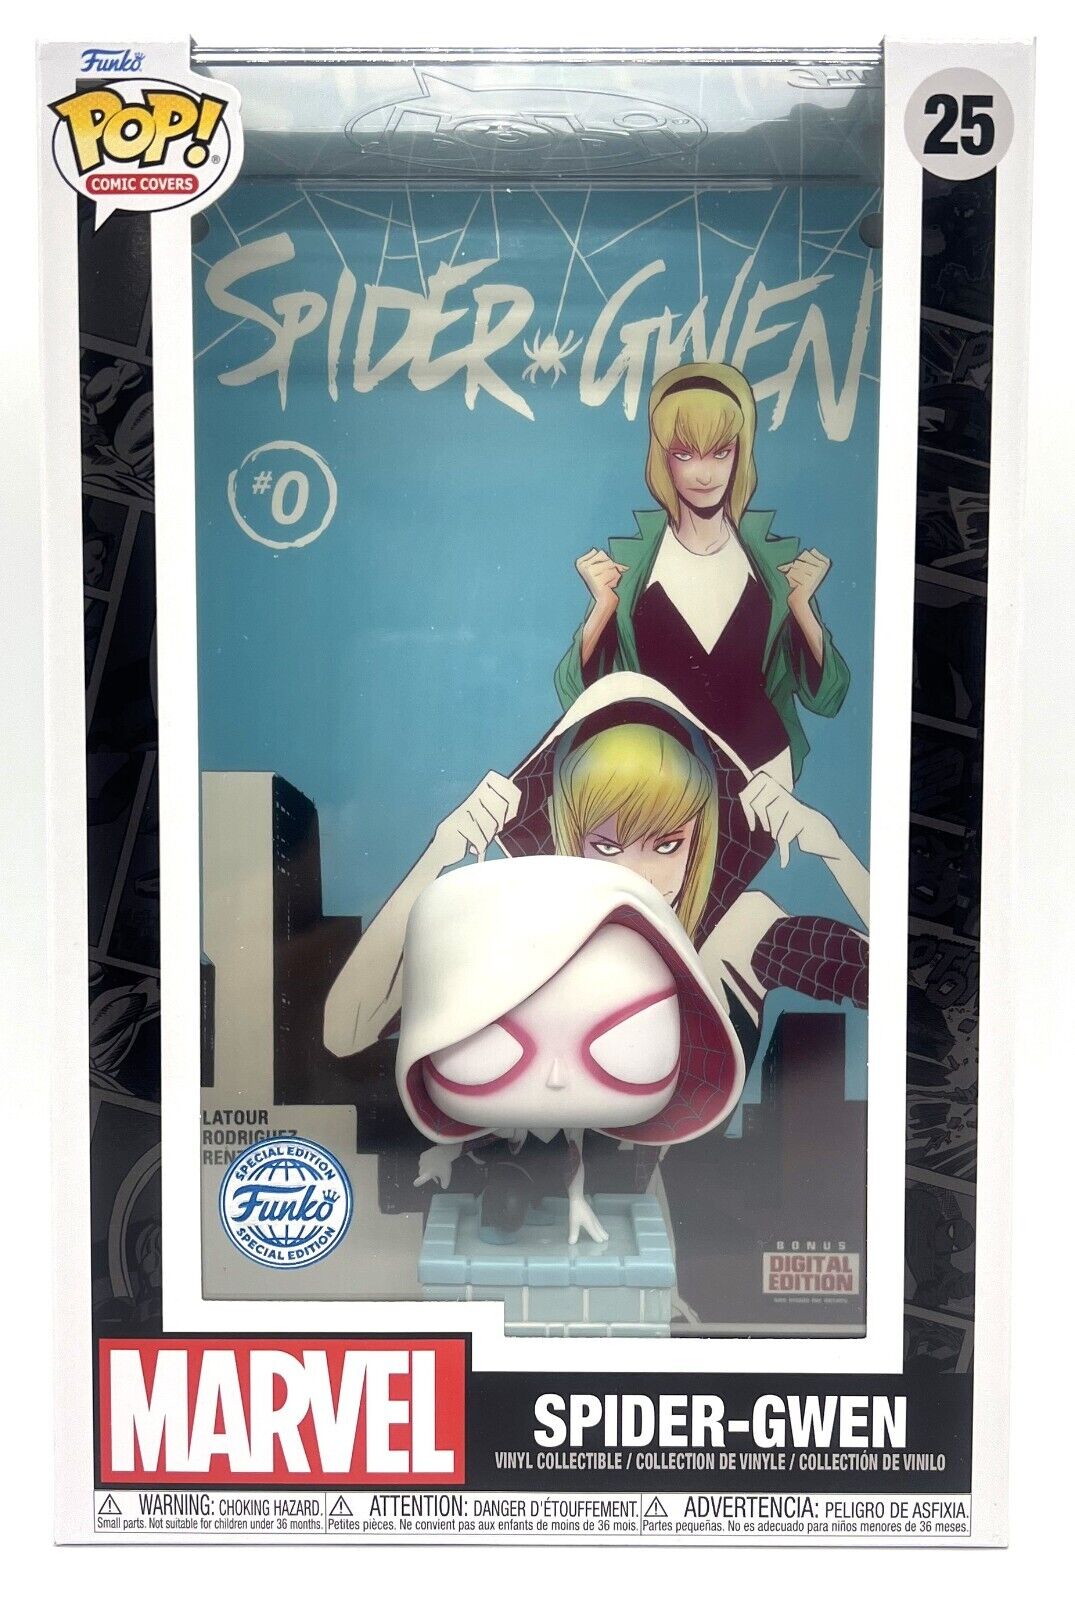 Funko Pop Comic Covers Marvel Spider-Gwen #25 Funko Special Edition